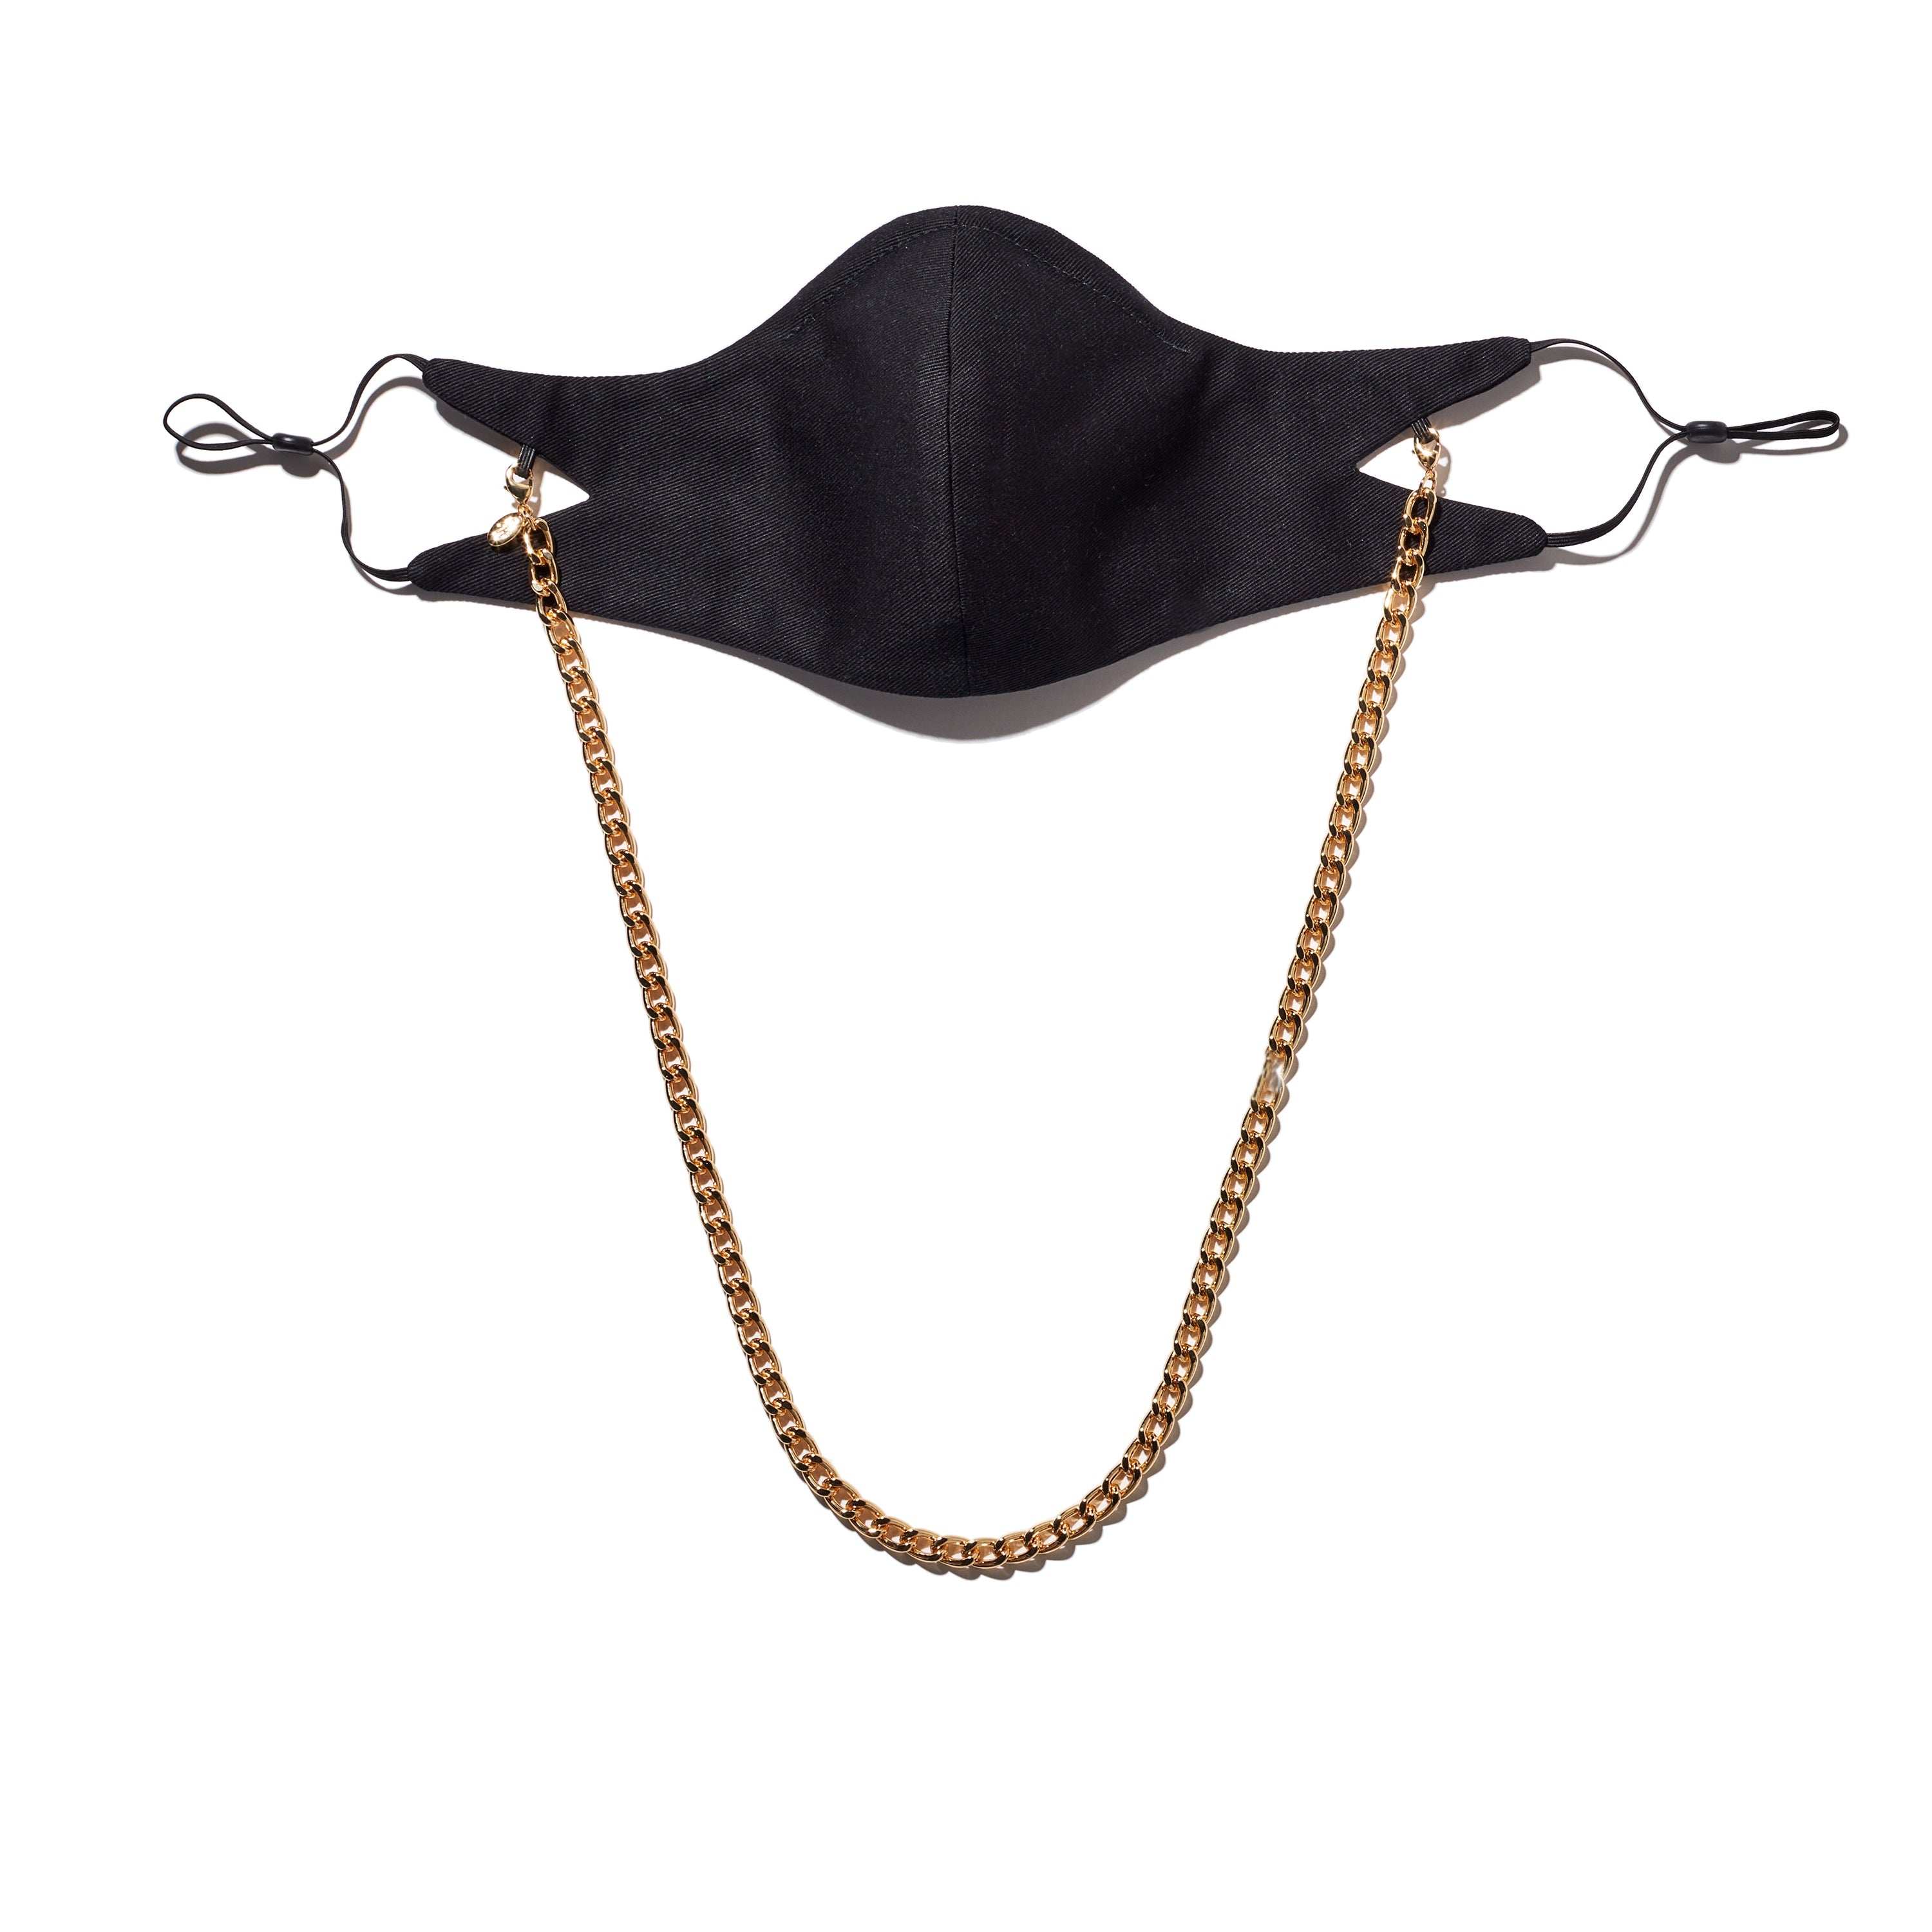 The Tina Cotton Twill Mask in Black with Gold Chain.